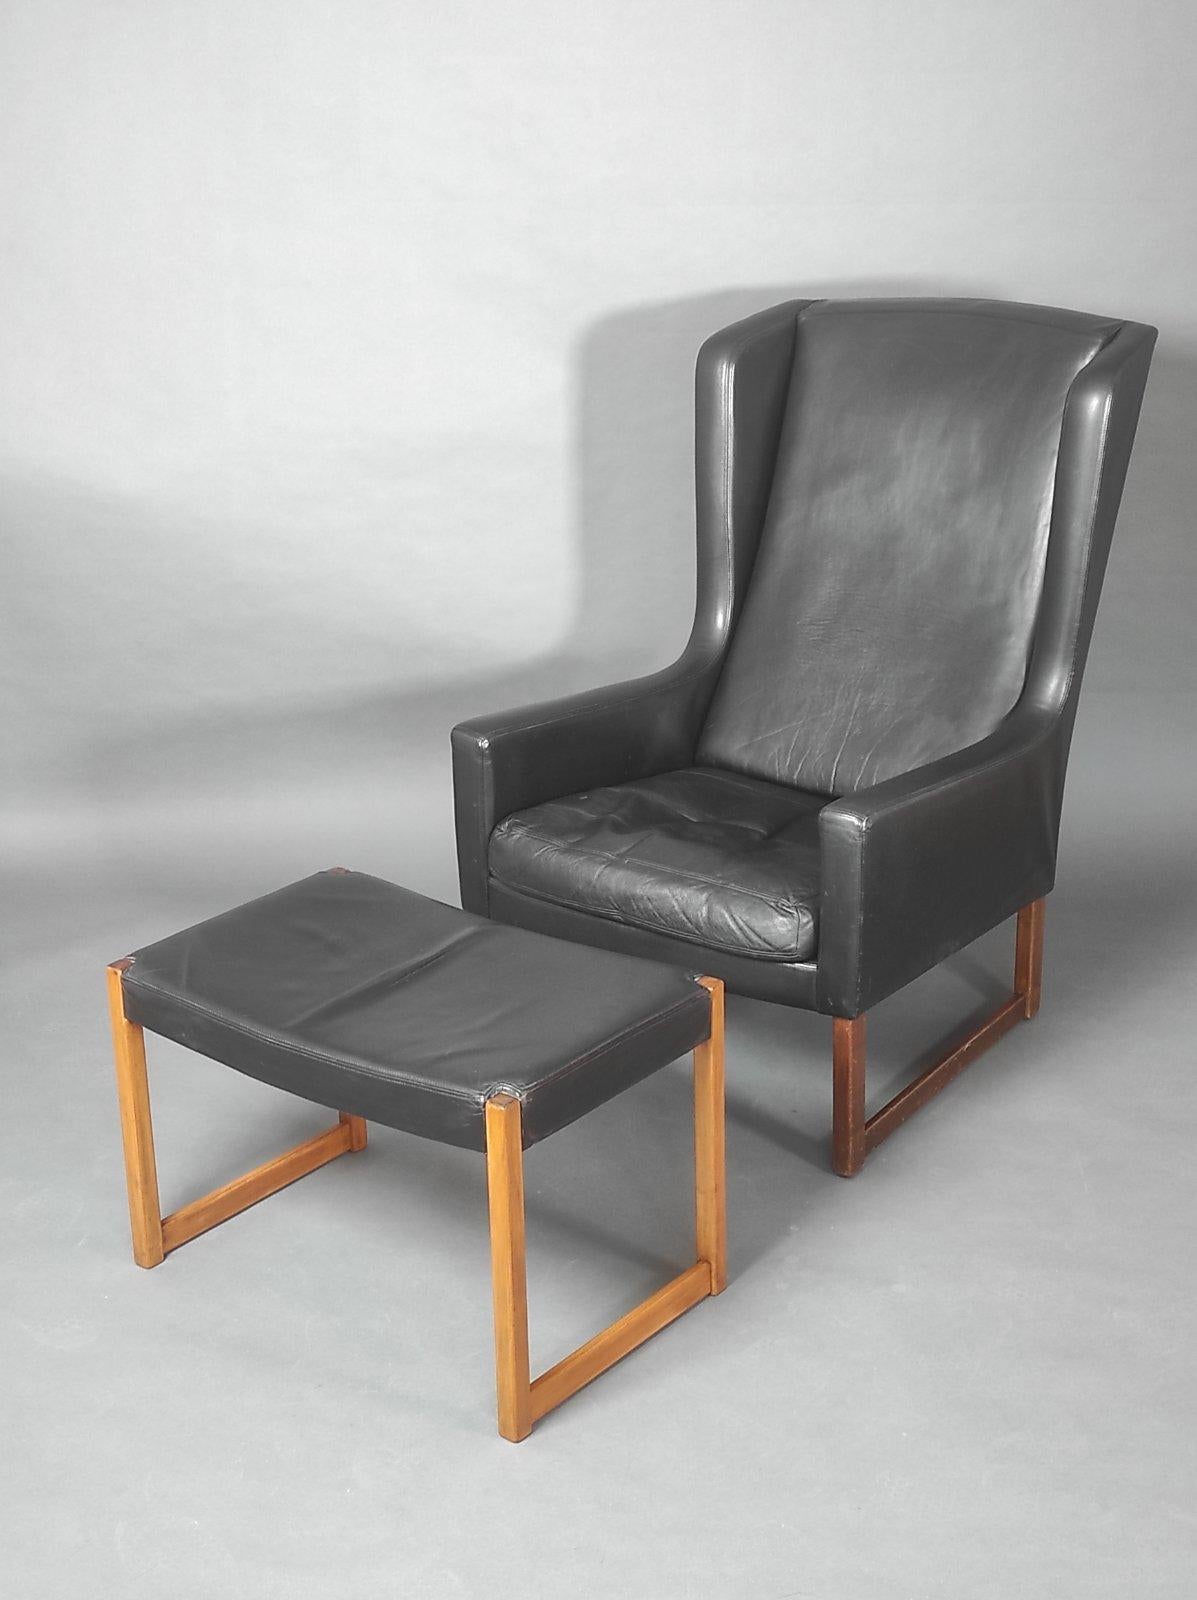 Vintage Leather Longue Chair By Rudolf B. Glatzel for Alfred Kill 1960s For Sale 2